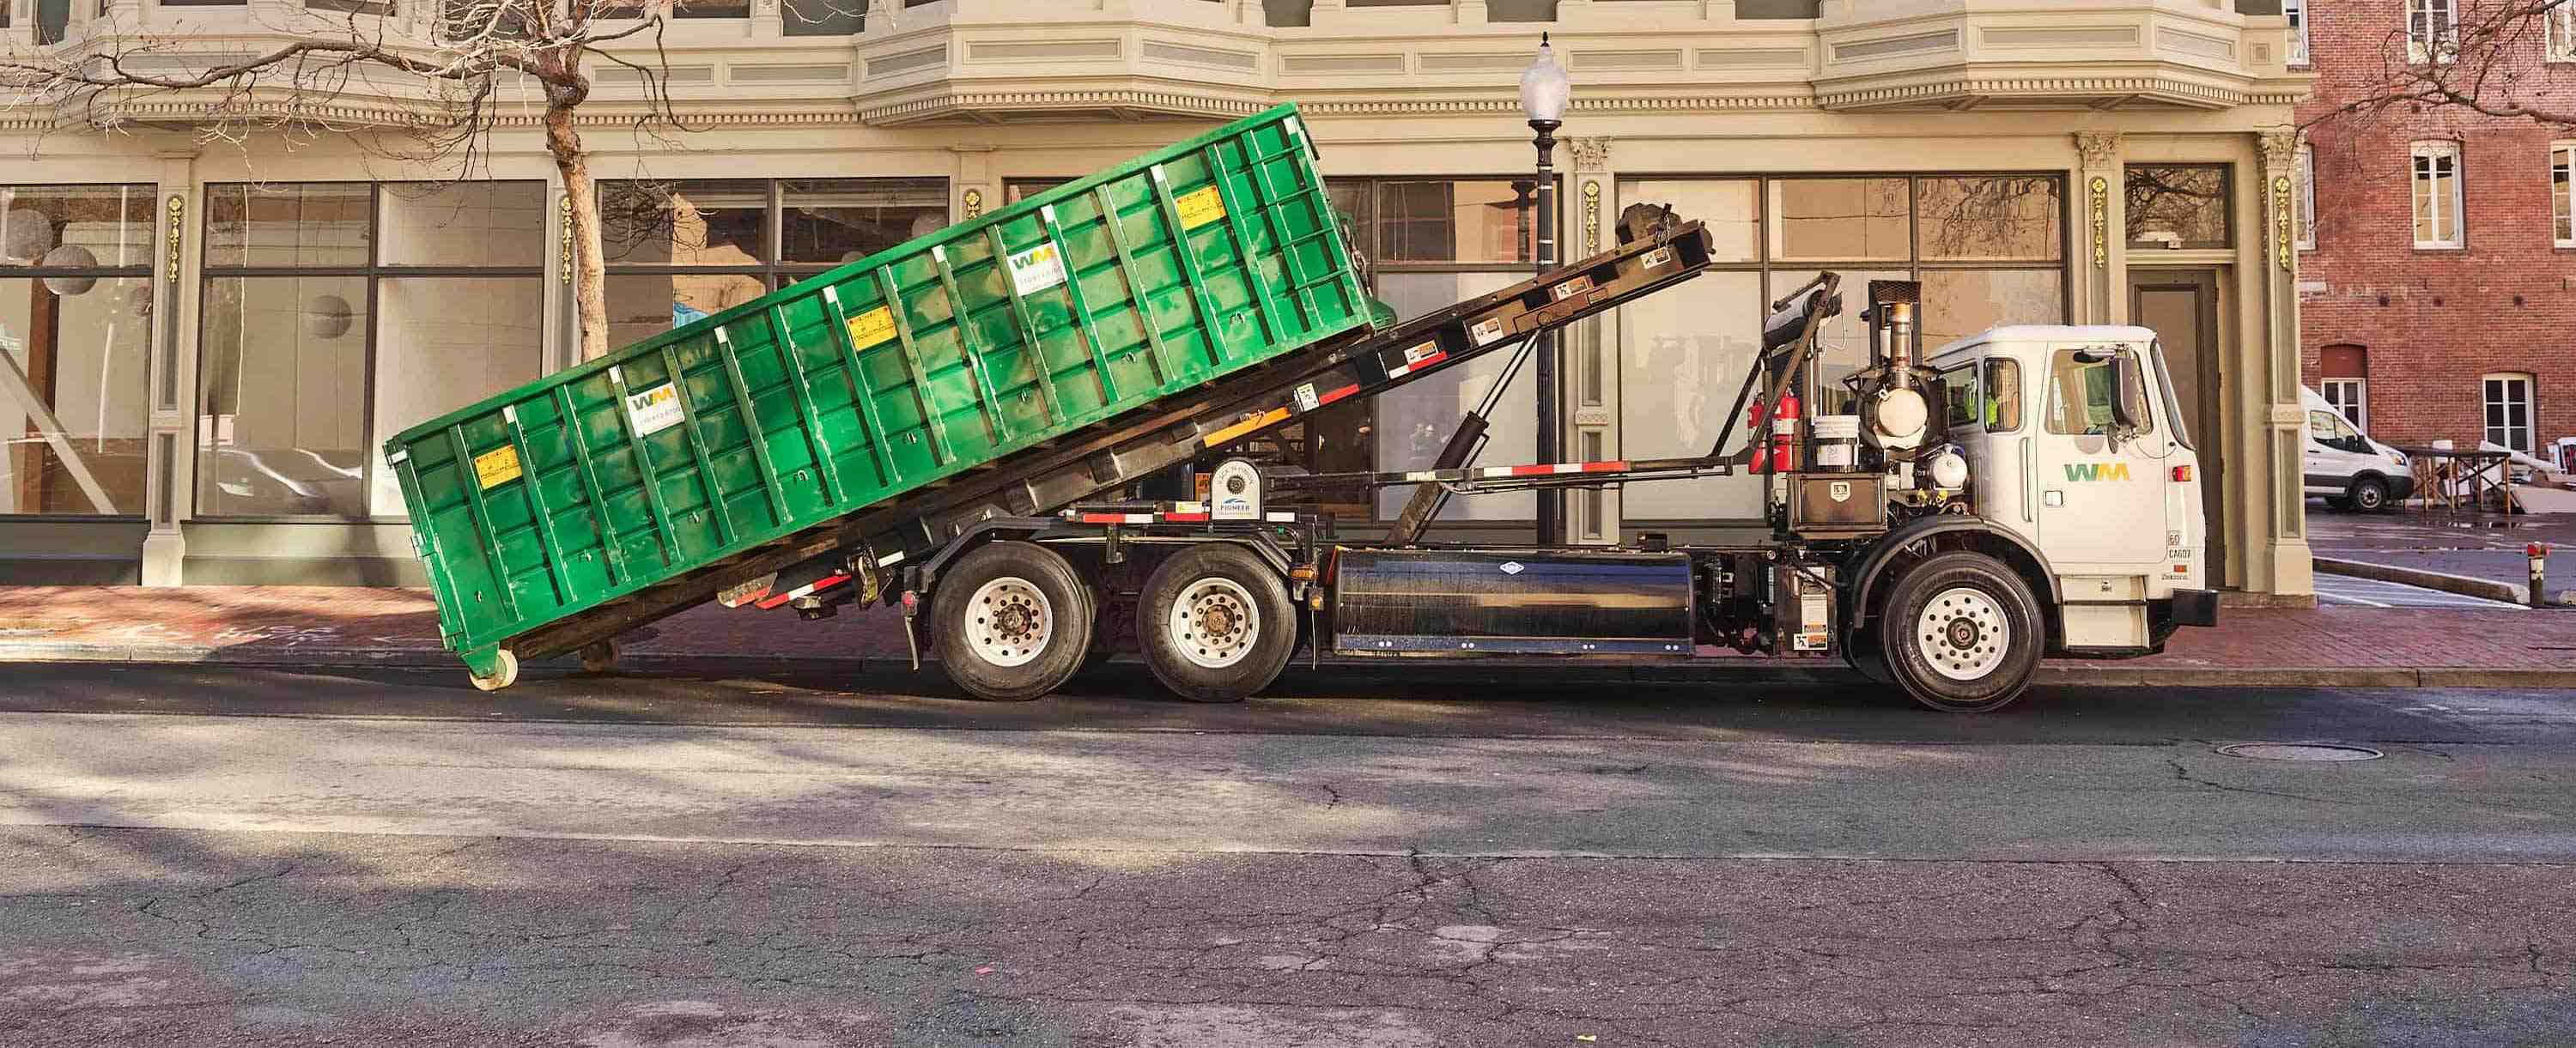 What Do I Need To Know To Hire A Affordable Dumpster Rental? thumbnail